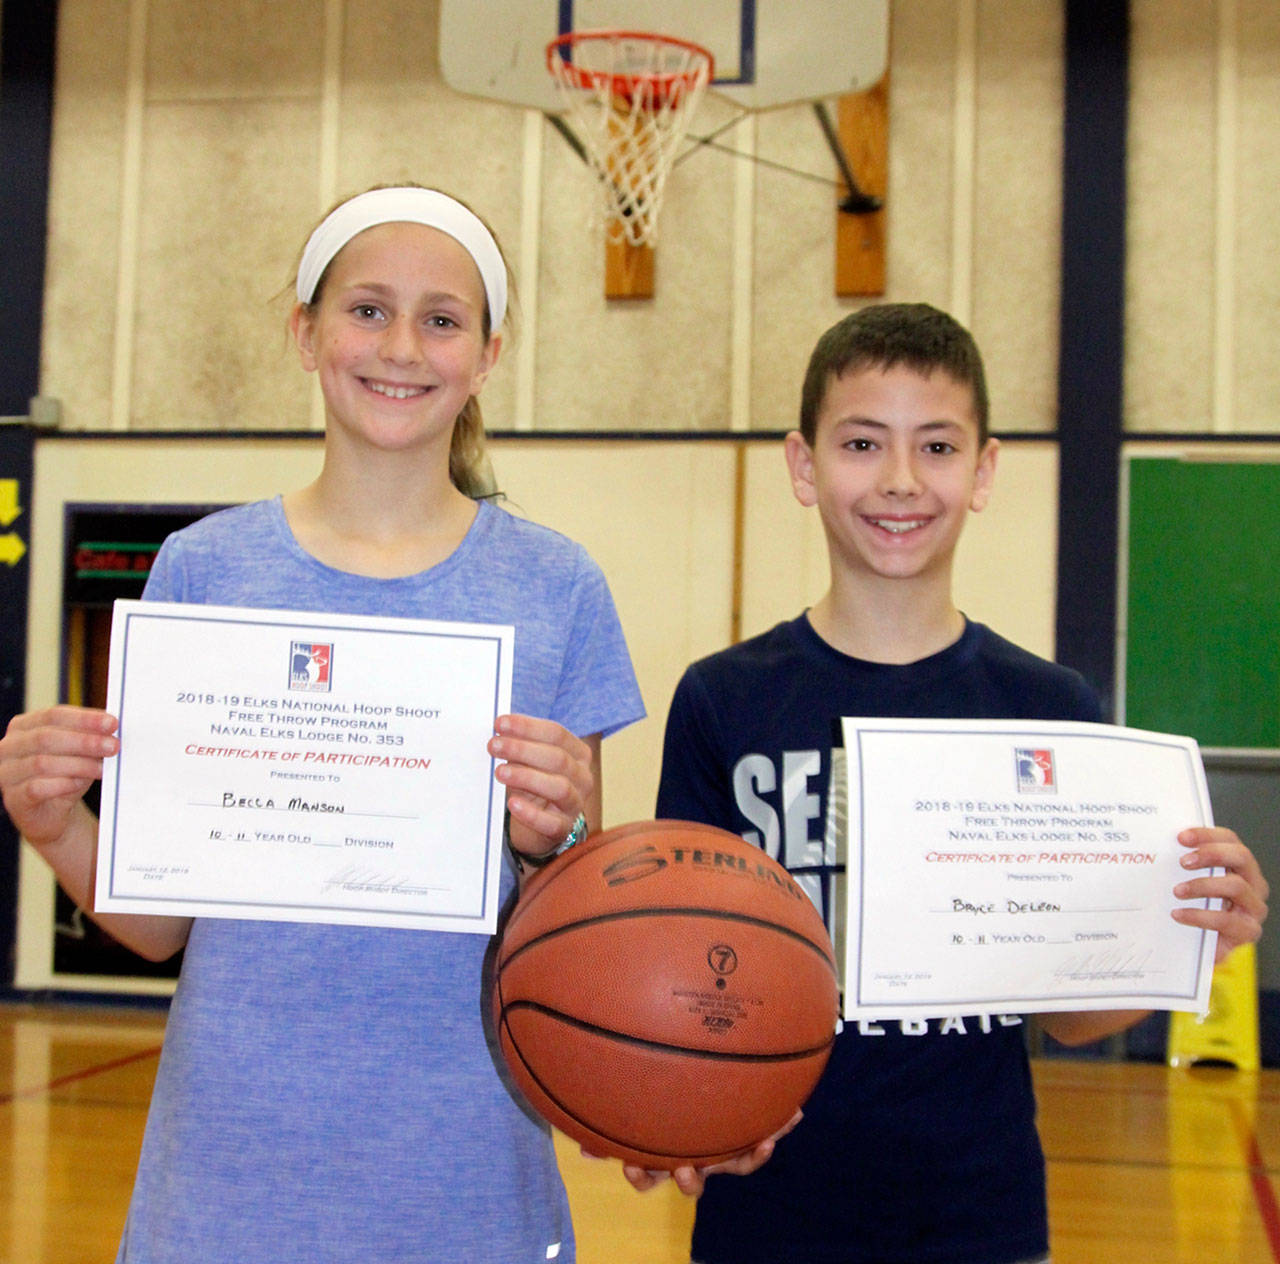 Dave Logan/for Peninsula Daily News The annual Port Angeles Naval Elks Lodge Elks Hoop Shoot contest was held Saturday at Stevens Middle School. Becca Manson, left, who made 5 of 25 shots and Bryce DeLeon who sank 18 of 25 shots are the 10-11 year old winners. DeLeon won his age group for the third straight year.